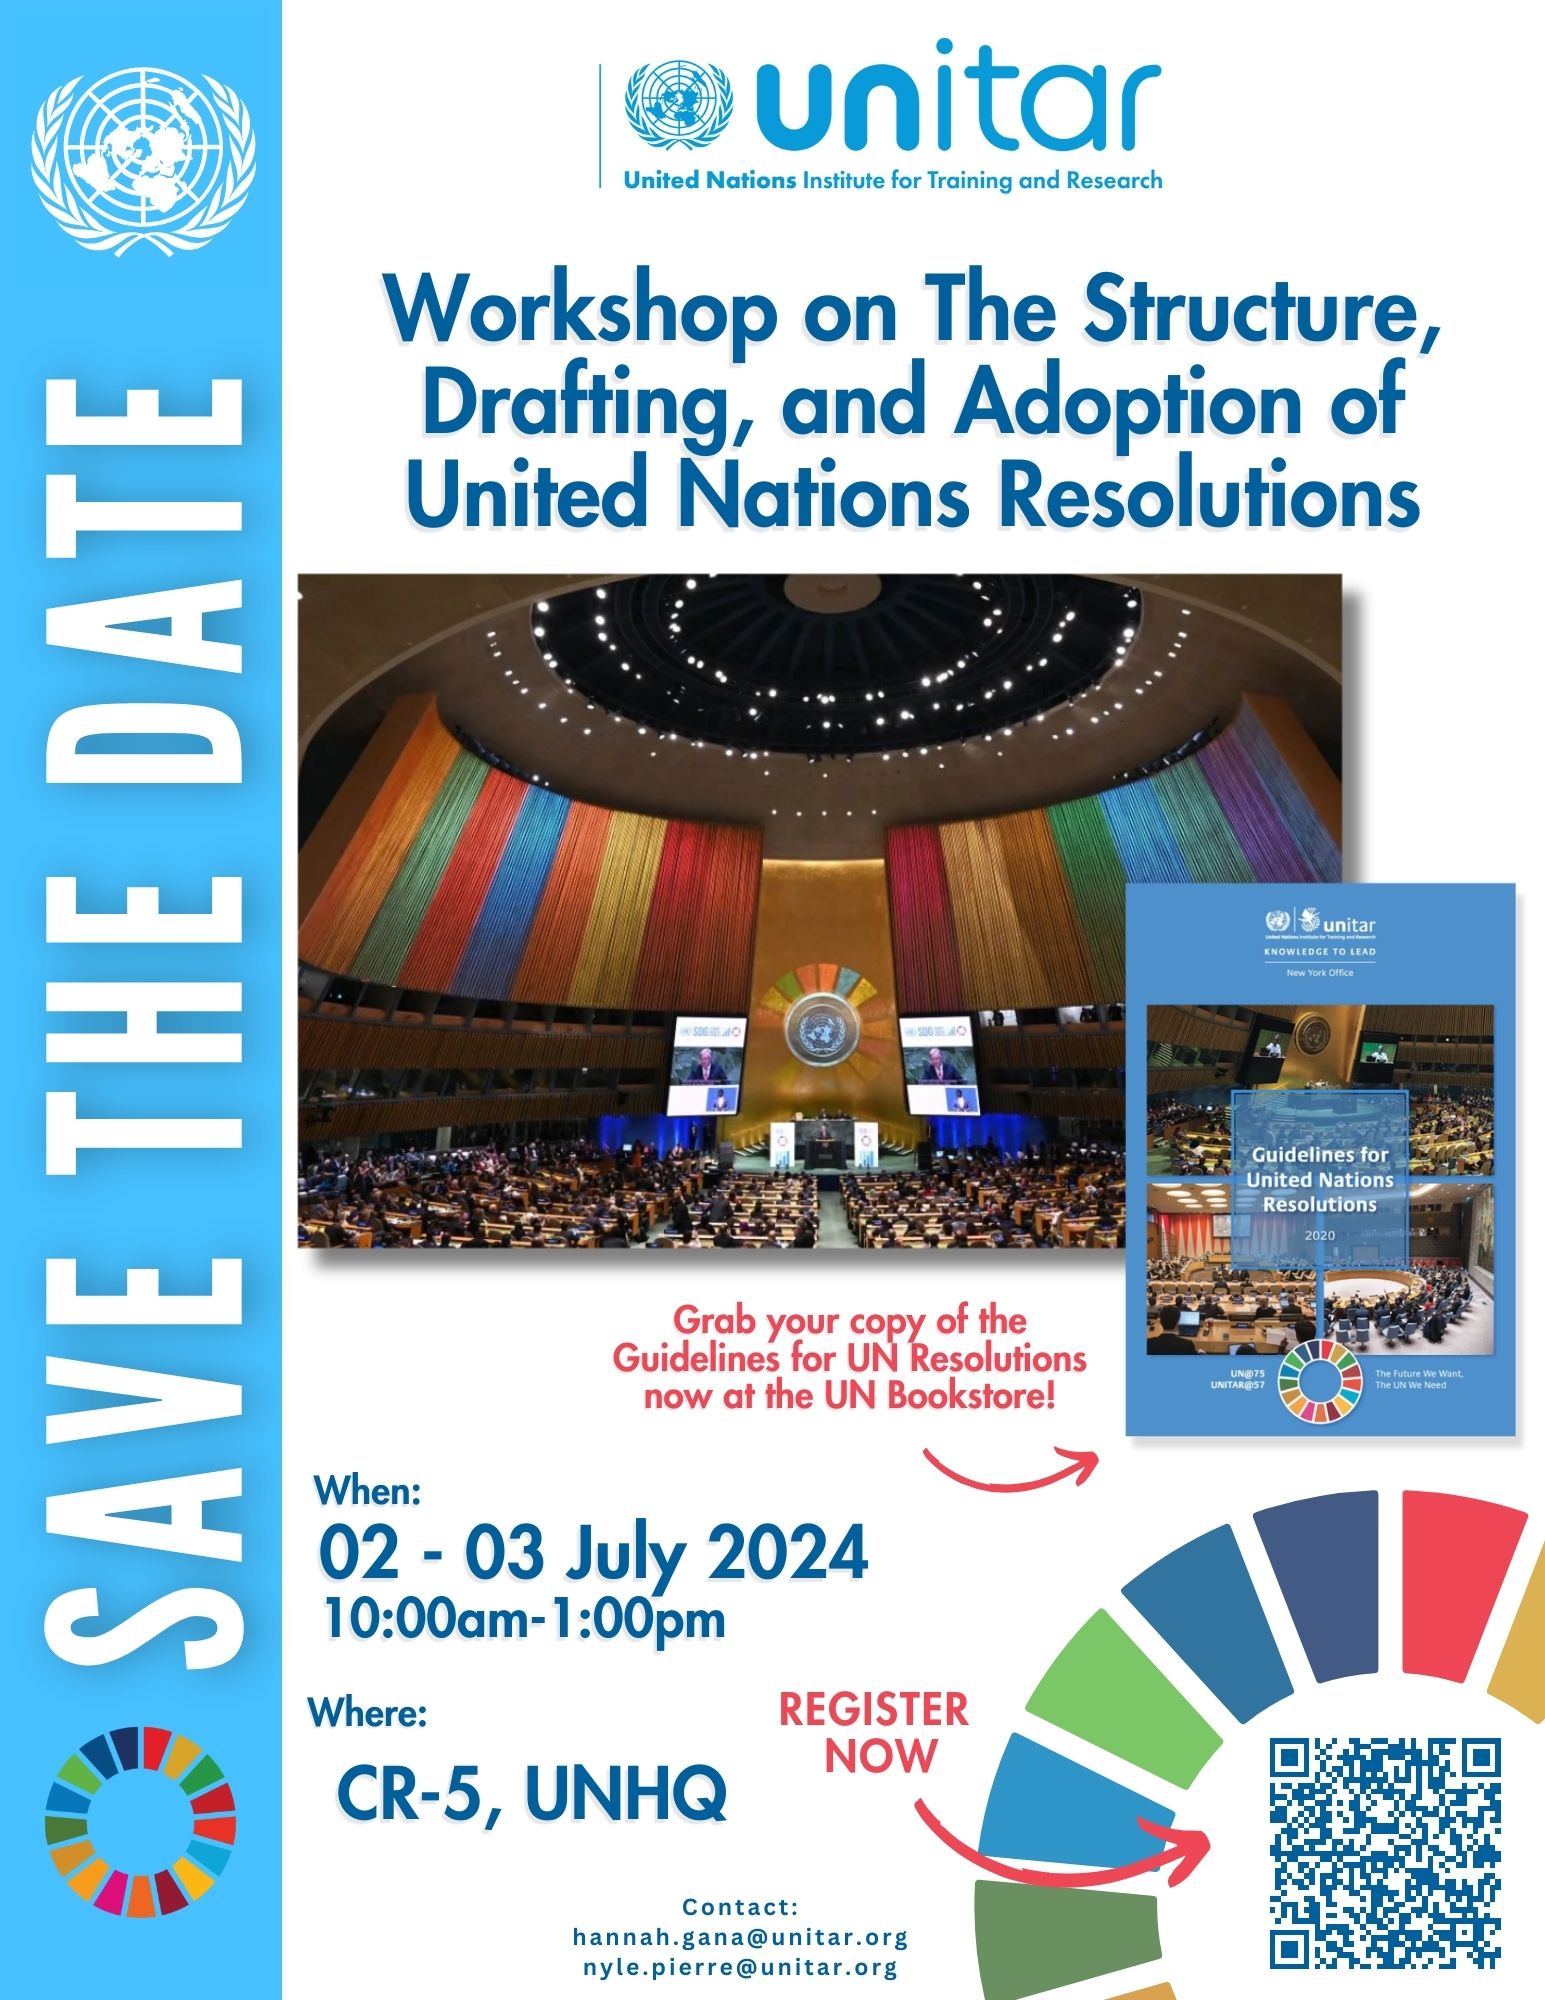 The Structure, Drafting and Adoption of United Nations Resolutions